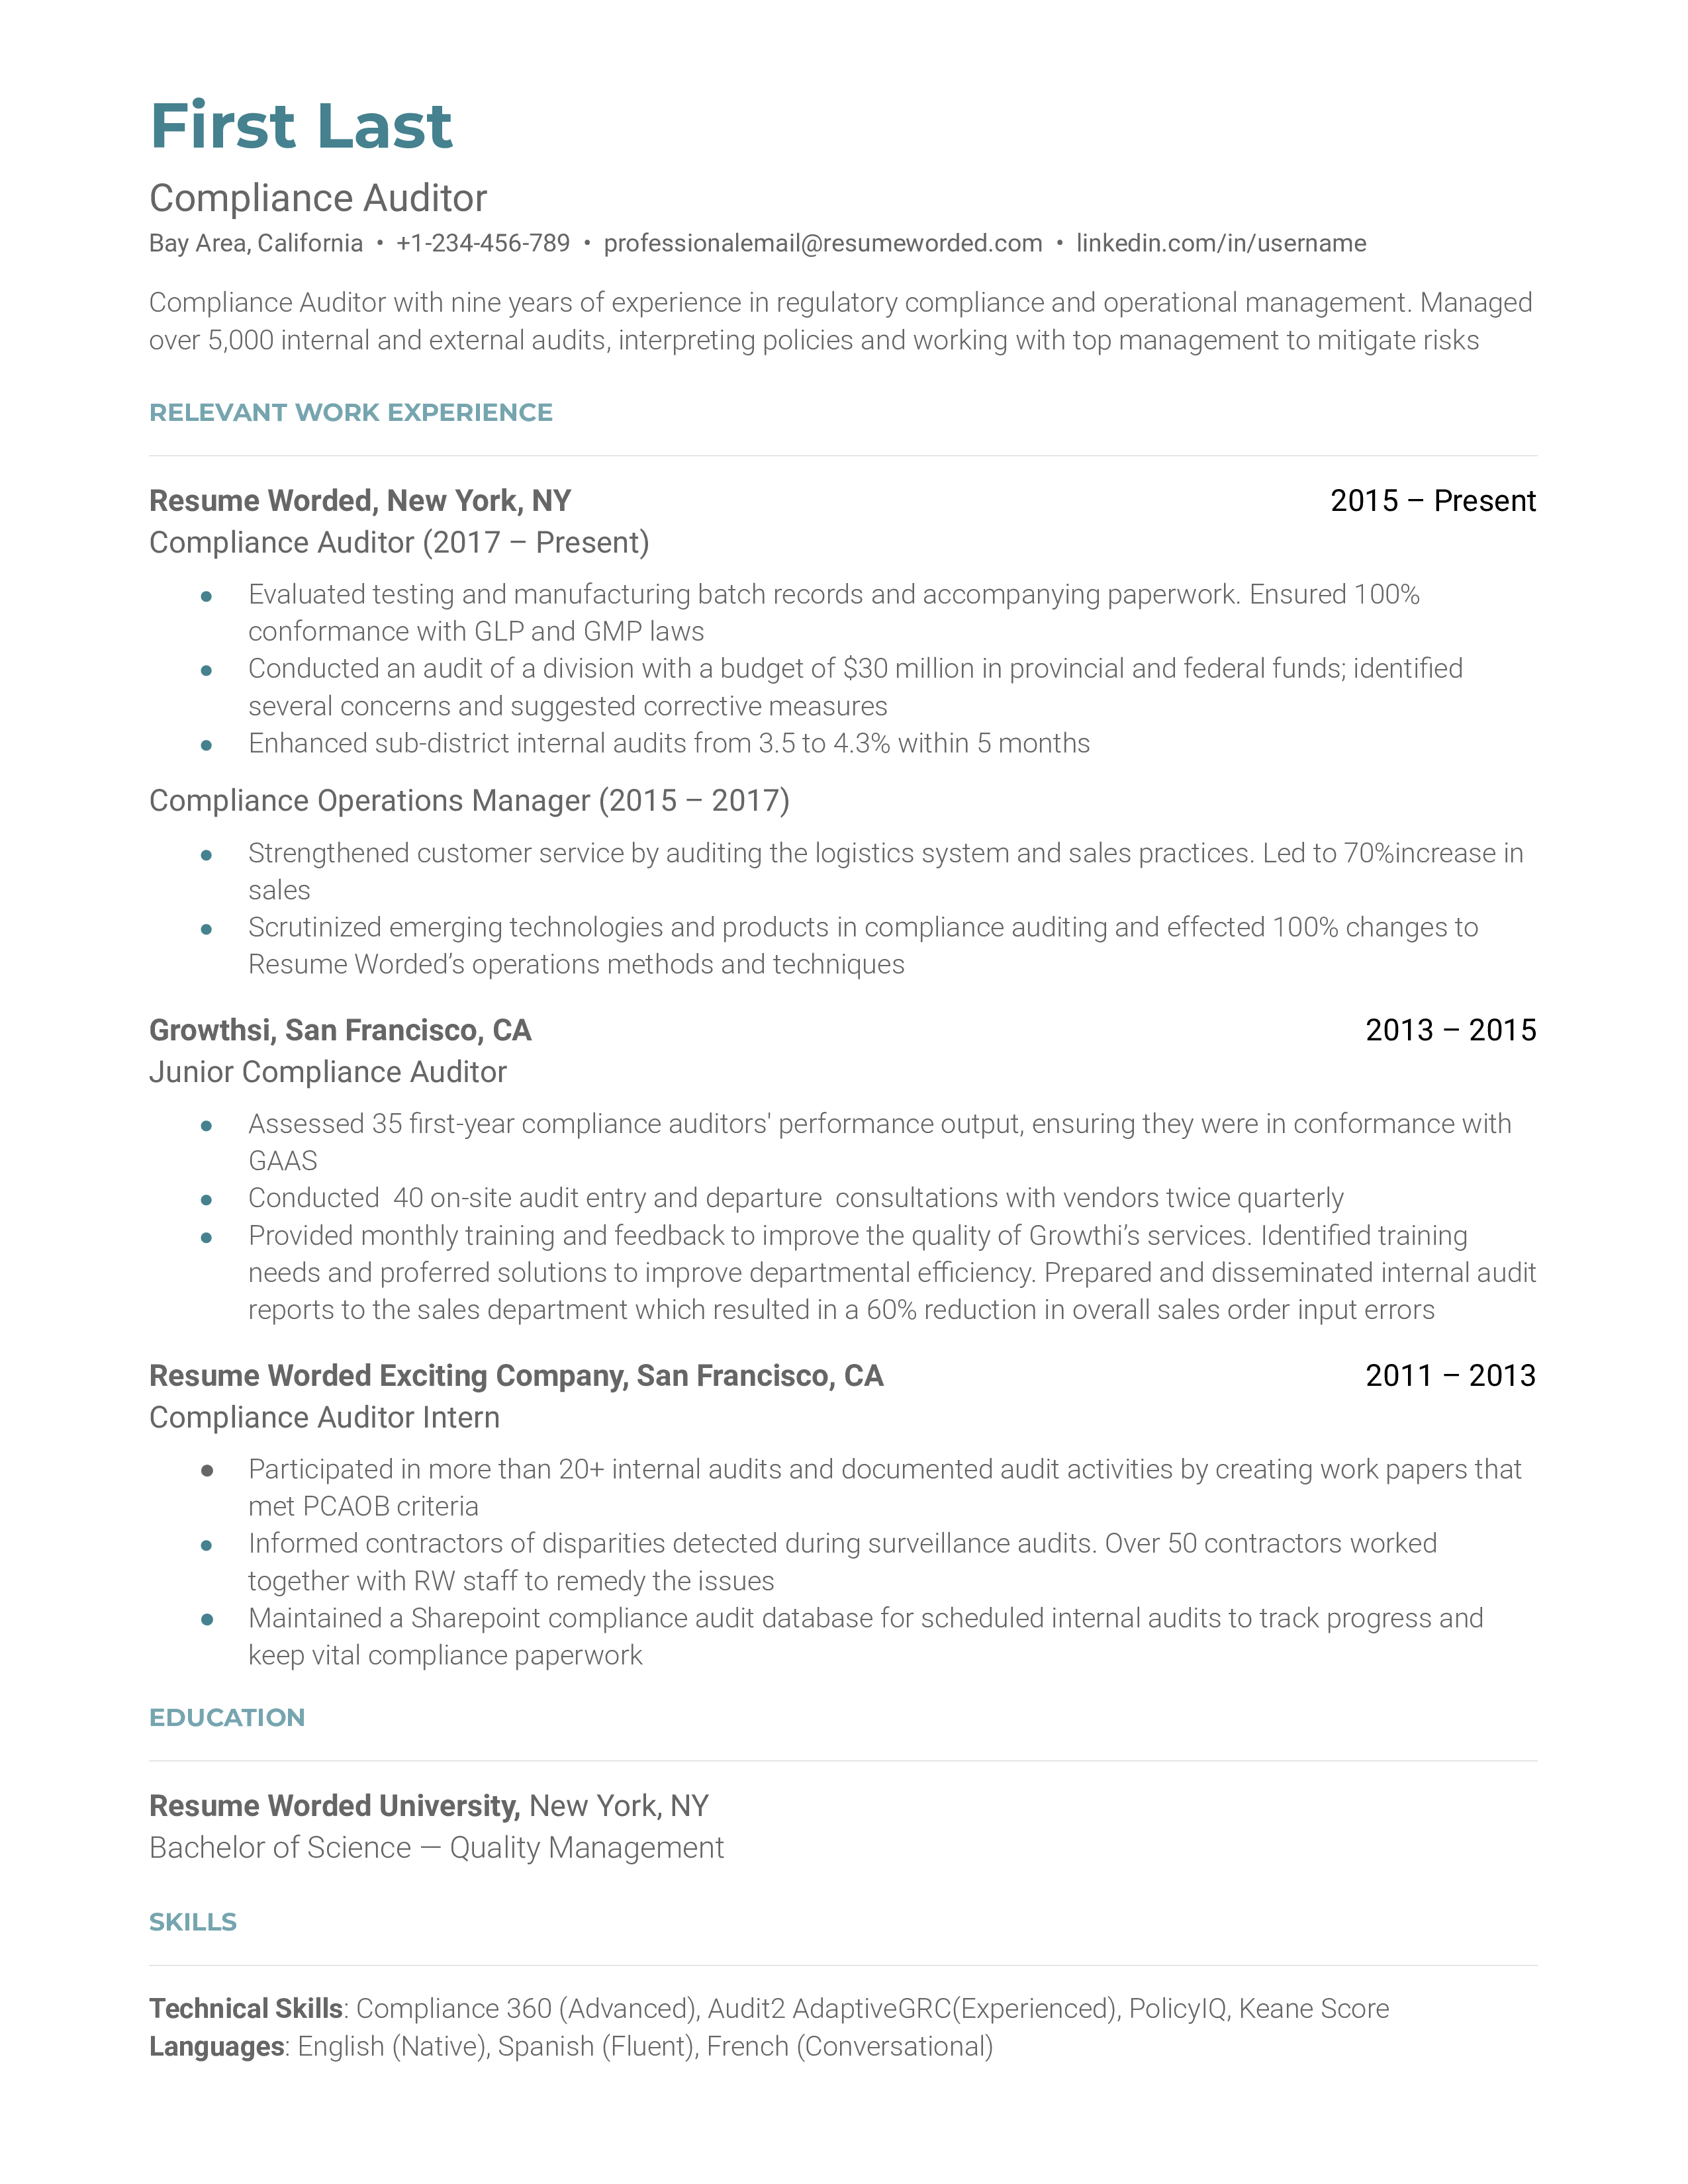 Compliance auditor resume example